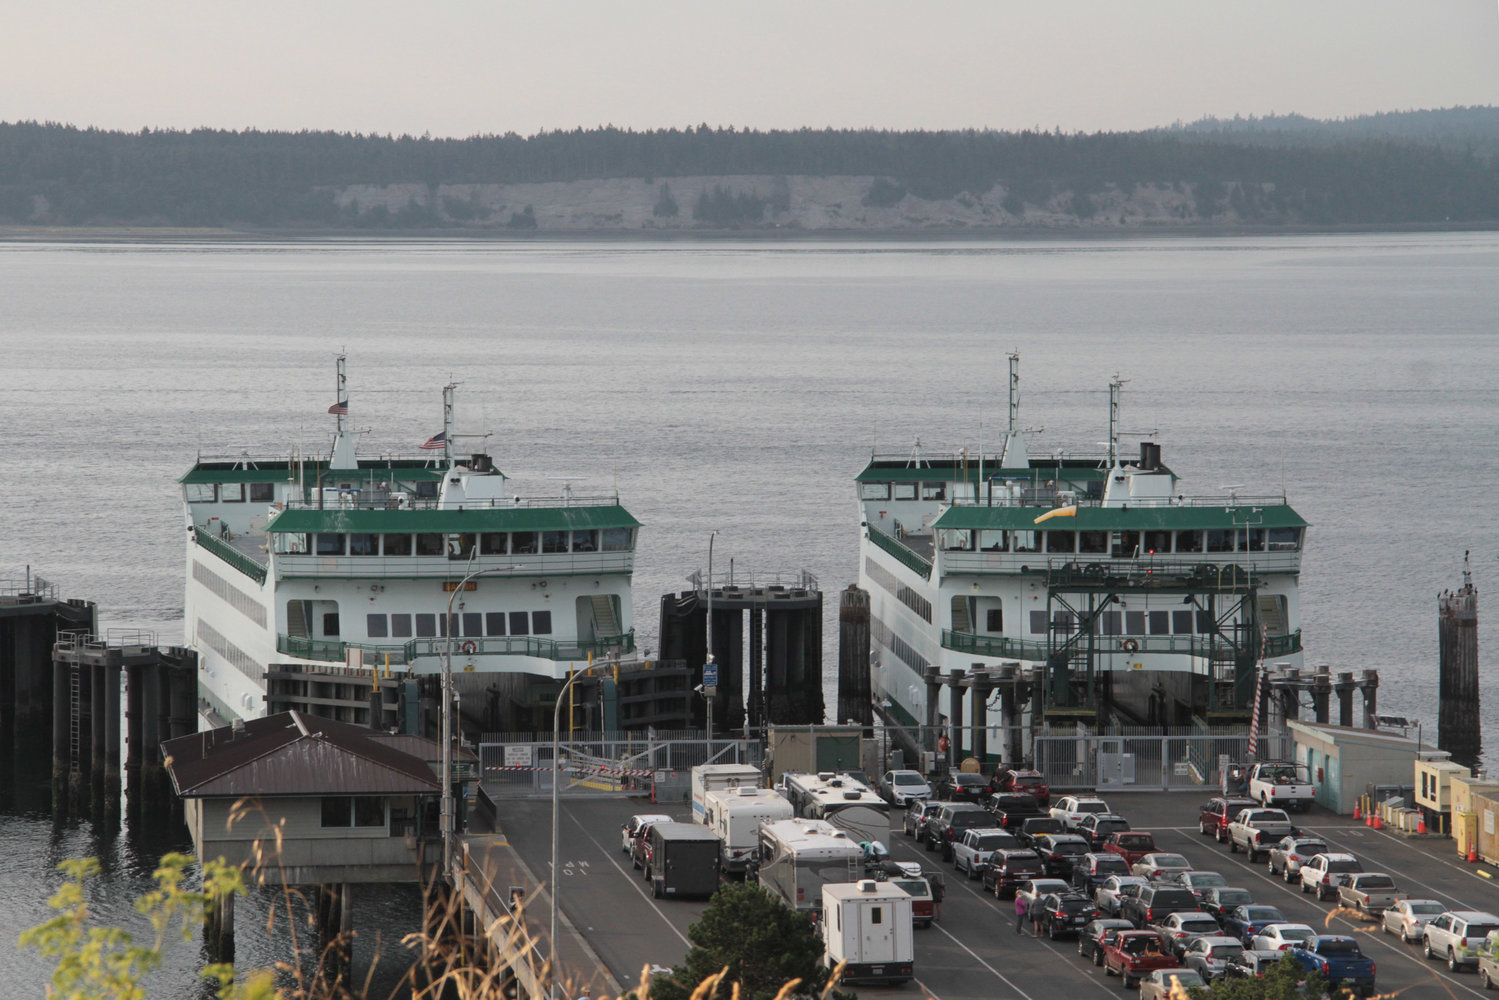 Two ferries are docked at the Port Townsend Ferry Terminal.